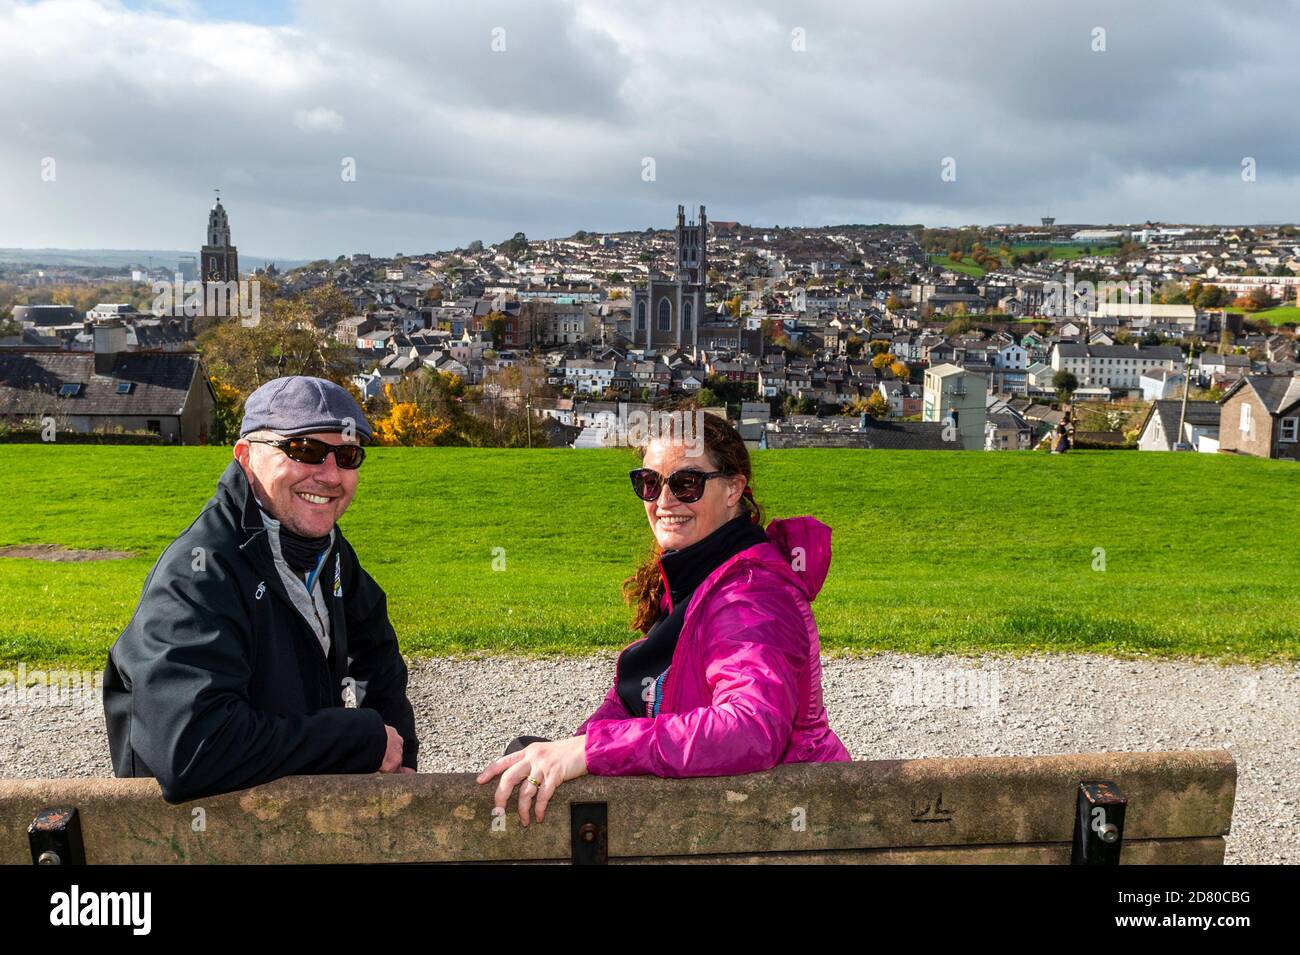 Cork, Ireland. 26th Oct, 2020. Many people took advantage of the good Bank Holiday weather in Cork today. Bell's Field overlooking Cork was very popular. Enjoying the view and good weather were Dan and Yvonne Curtin from Douglas. Credit: AG News/Alamy Live News Stock Photo